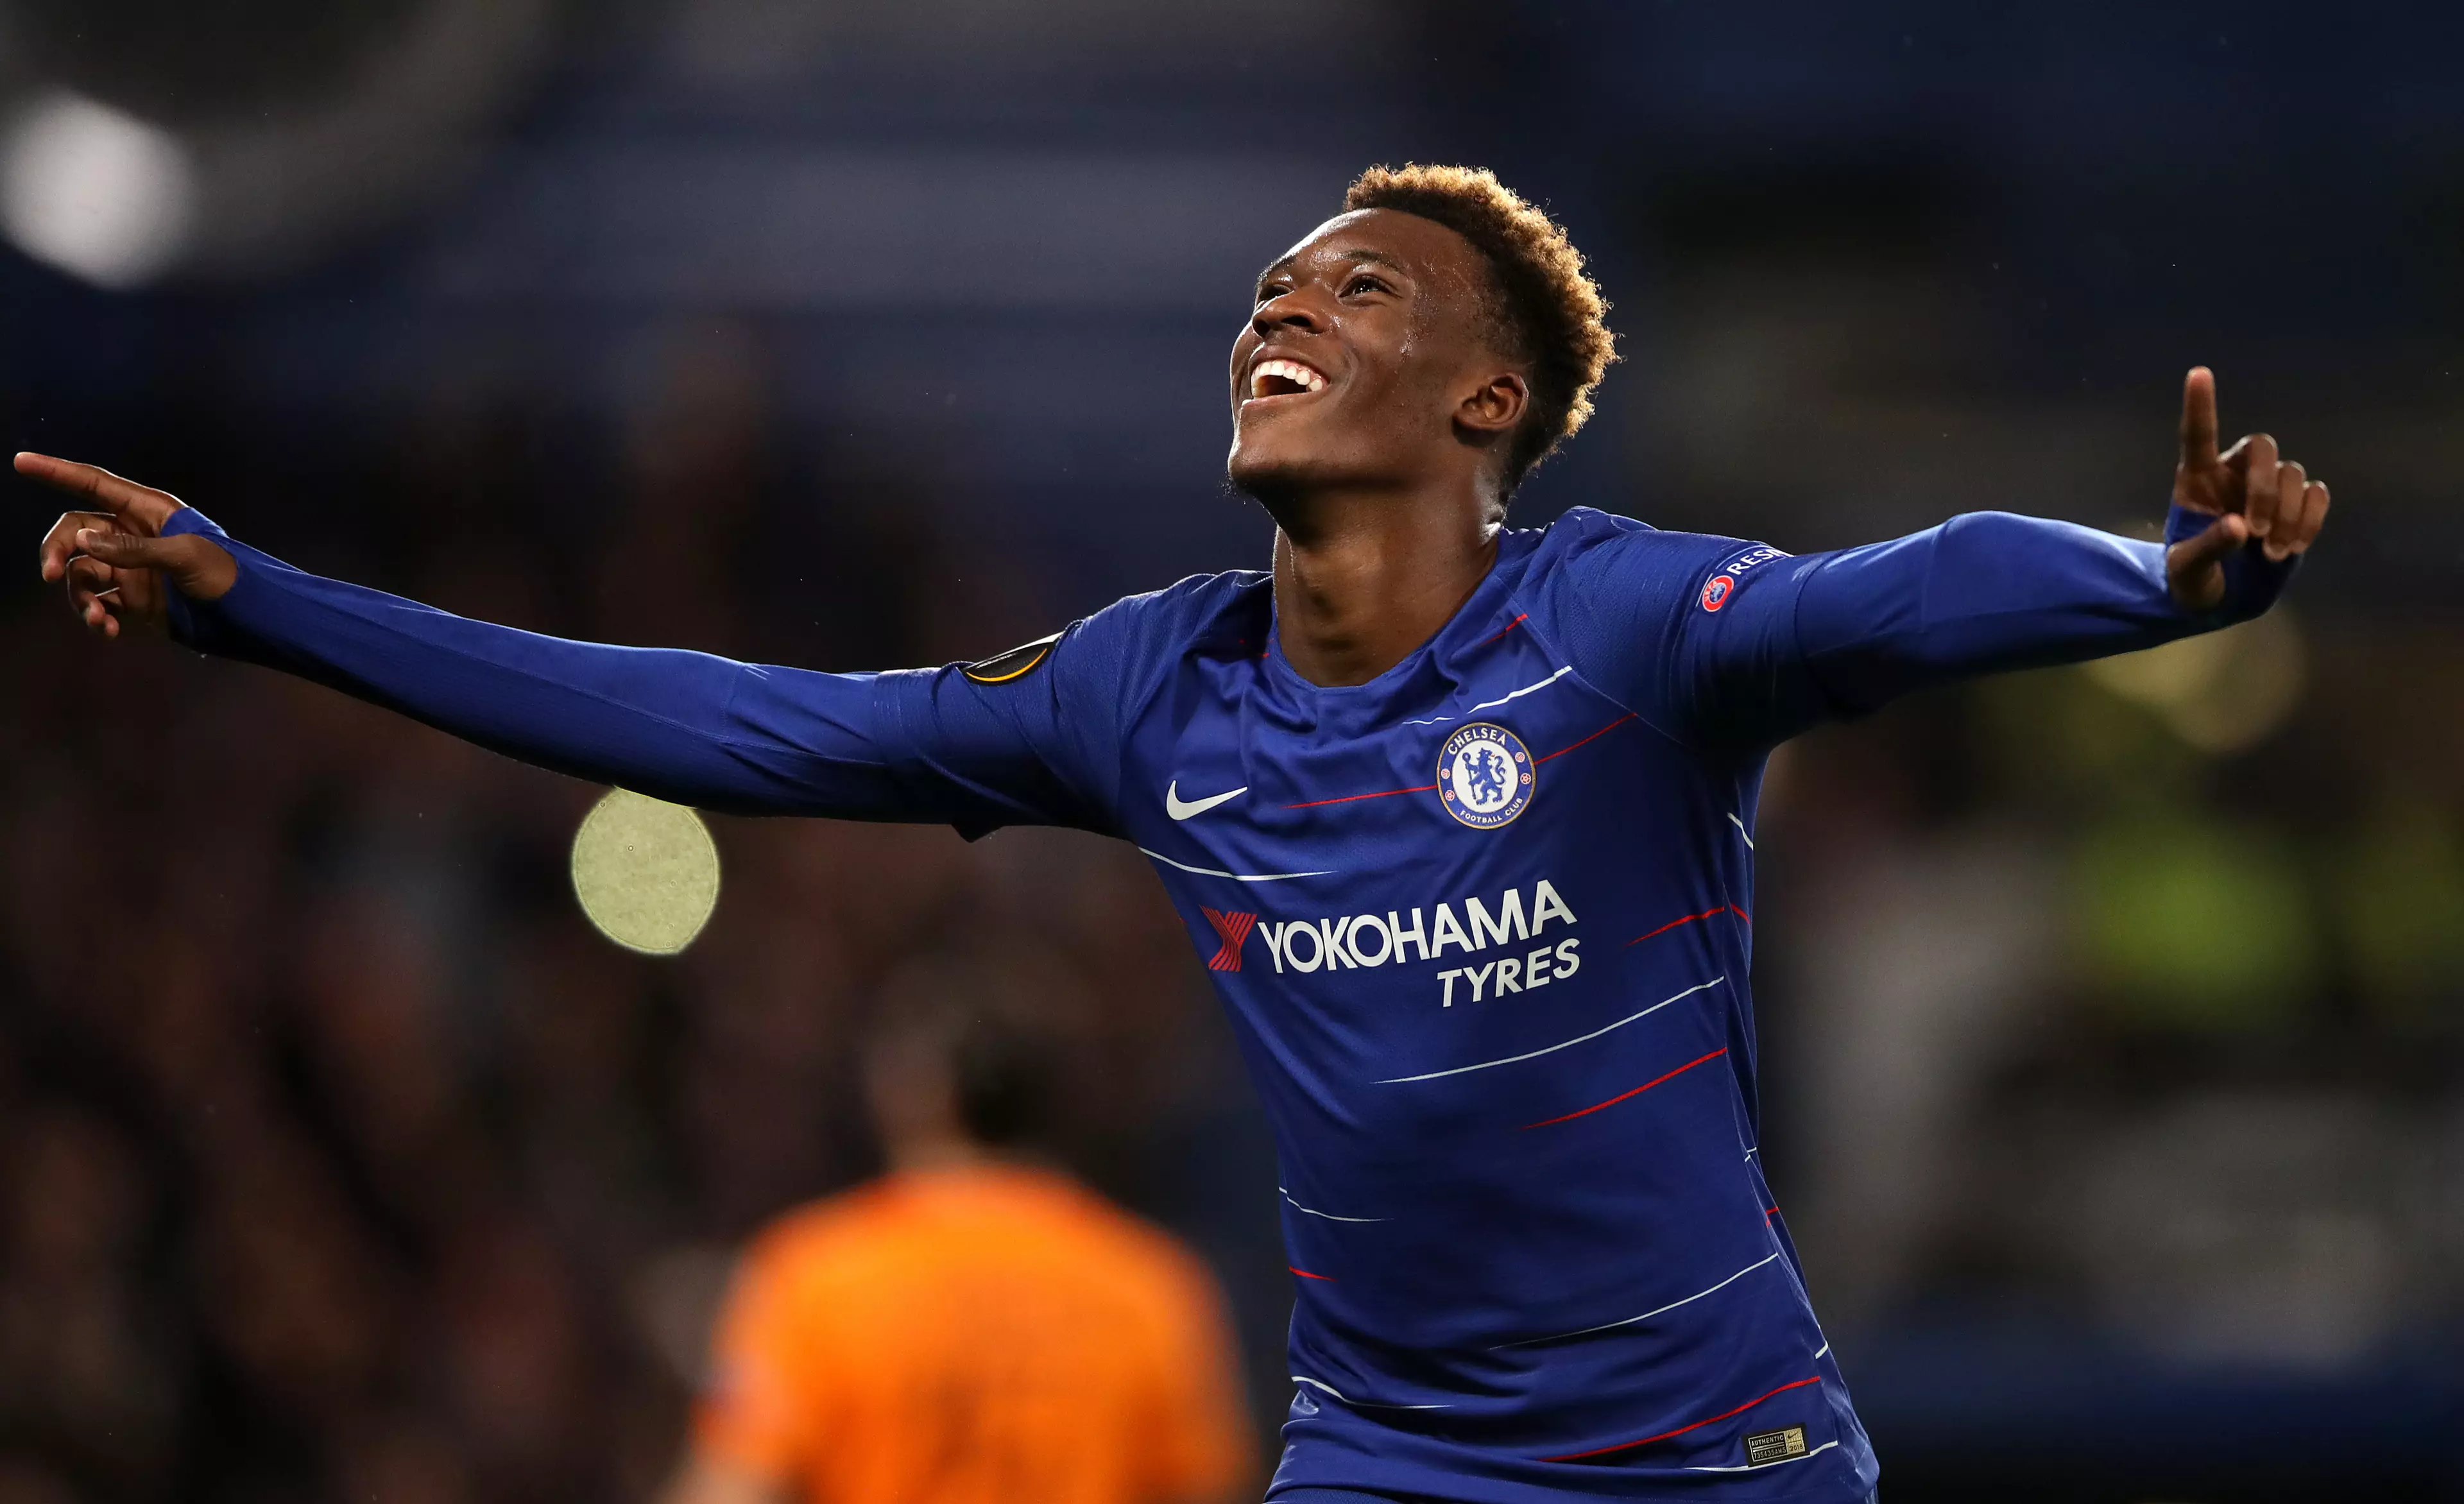 Hudson-Odoi could be the next Englishman to move to Germany. Image: PA Images